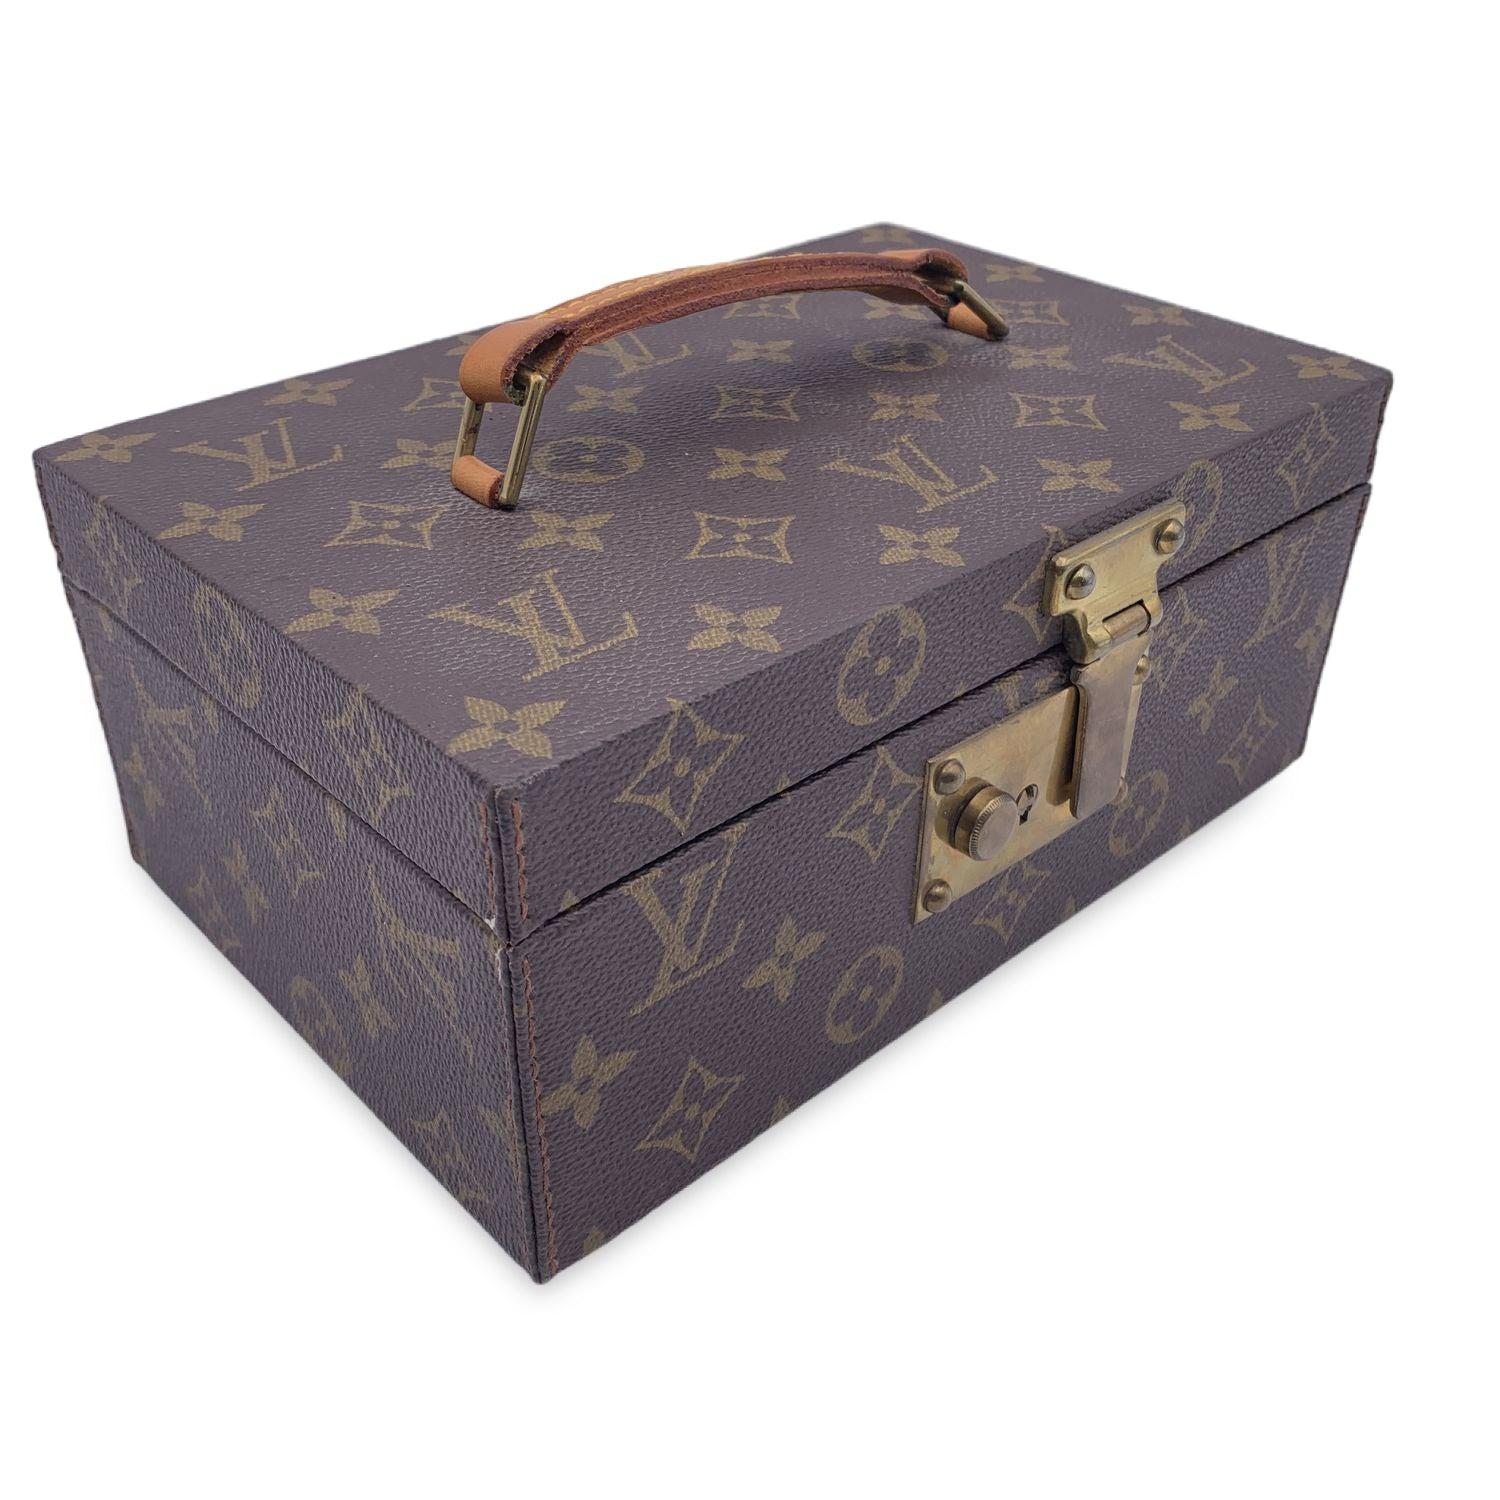 This beautiful Bag will come with a Certificate of Authenticity provided by Entrupy. The certificate will be provided at no further cost Vintage Louis Vuitton 'Boite A Tout' jewelry case in monogram canvas, mod. M47236. Key lock closure (Keys are